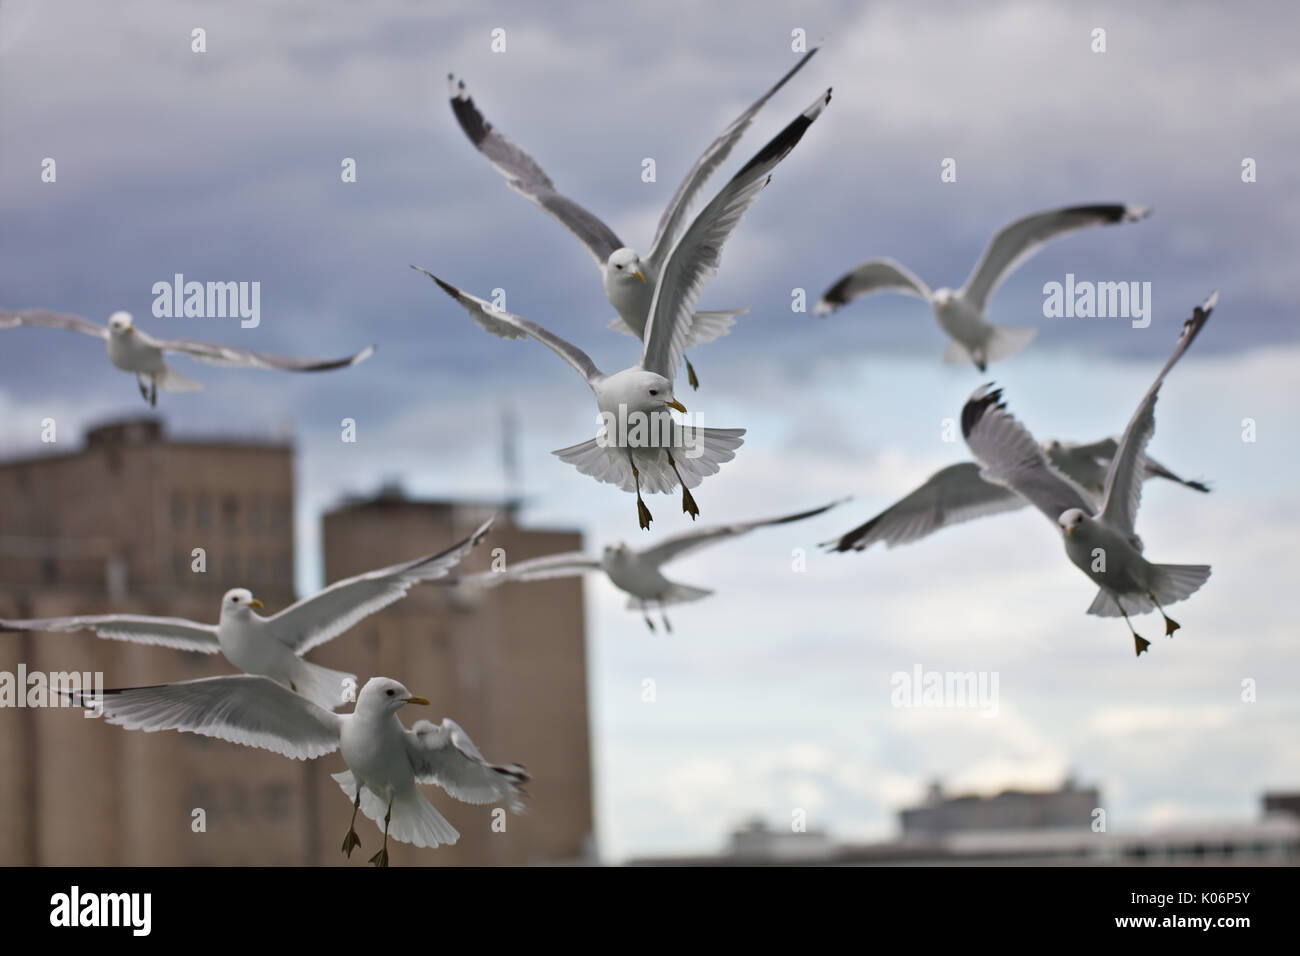 Common seagulls (larus canus) in flight, only central bird in focus Stock Photo